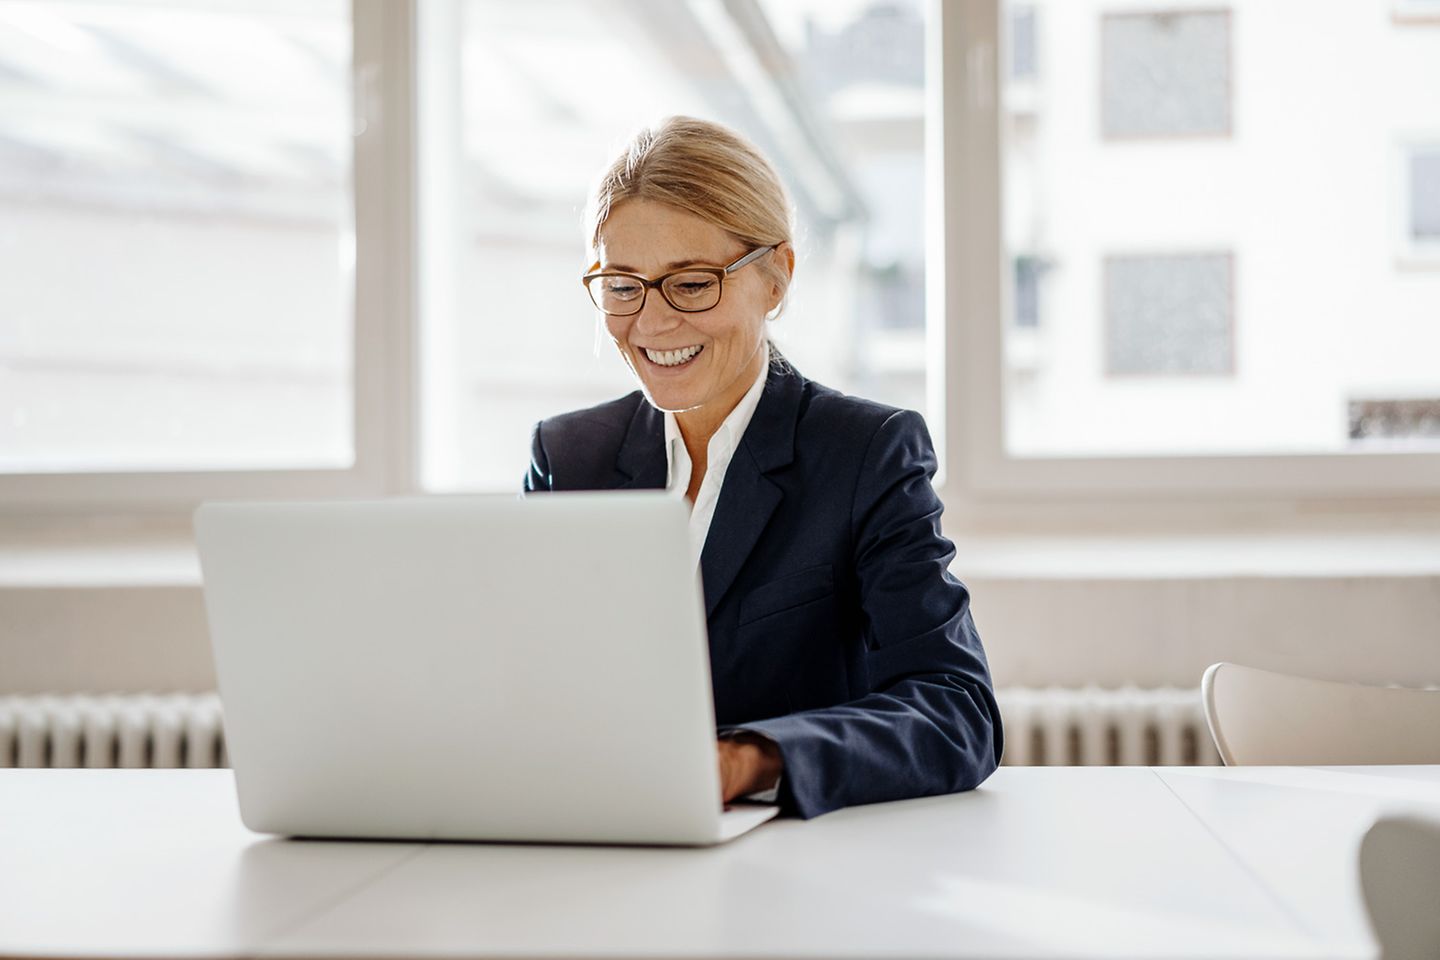 Smiling businesswoman sits in office working on laptop